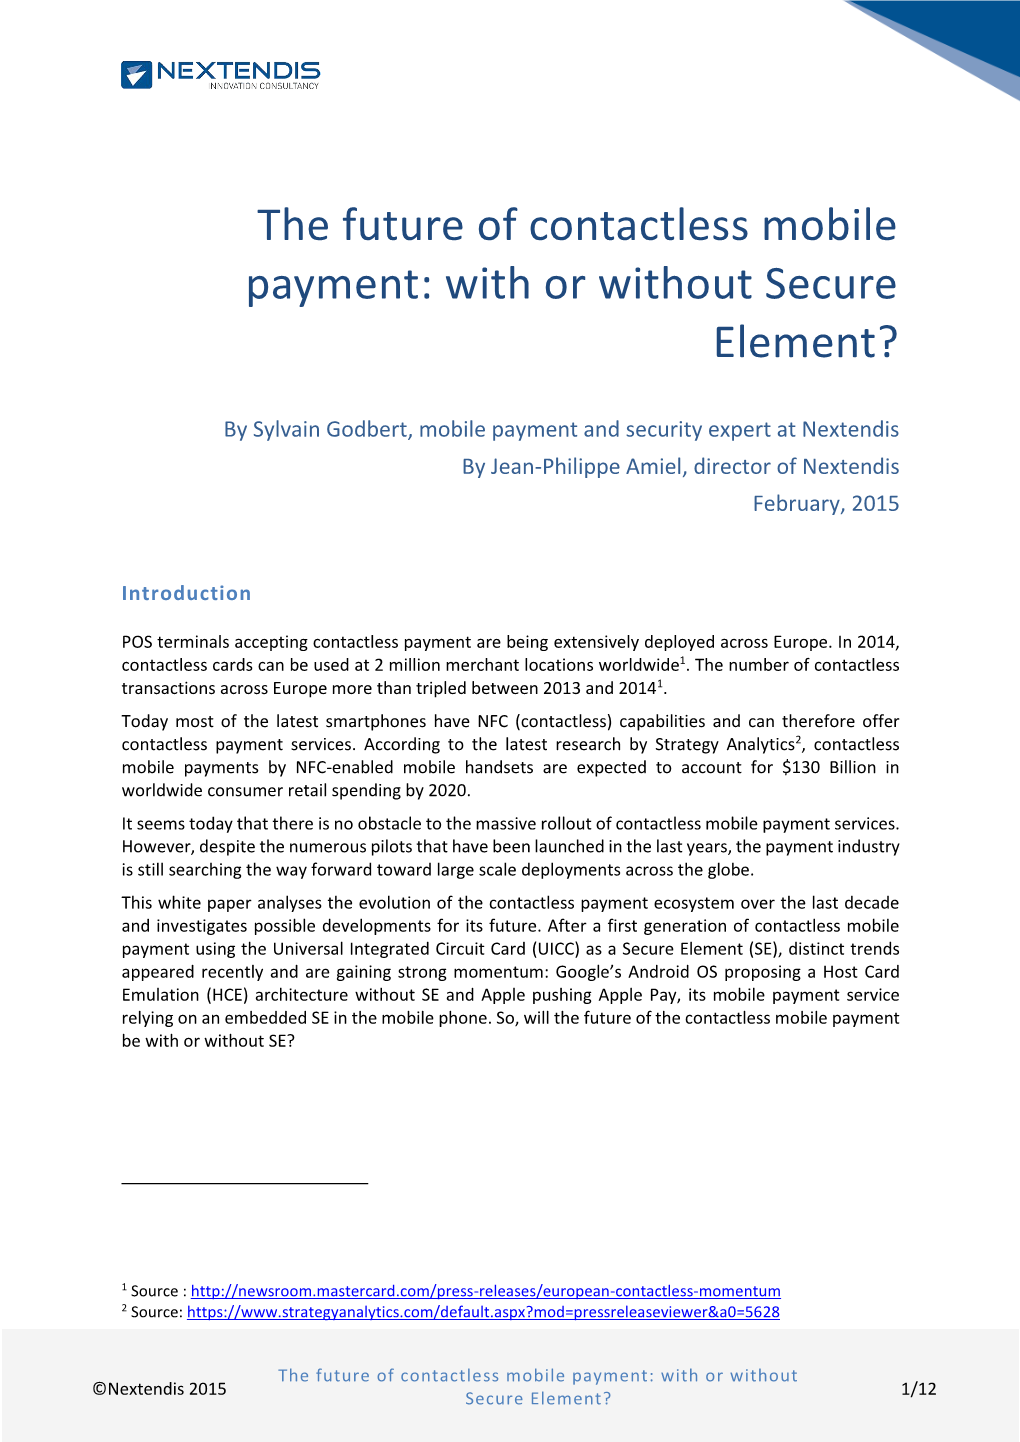 The Future of Contactless Mobile Payment: with Or Without Secure Element?